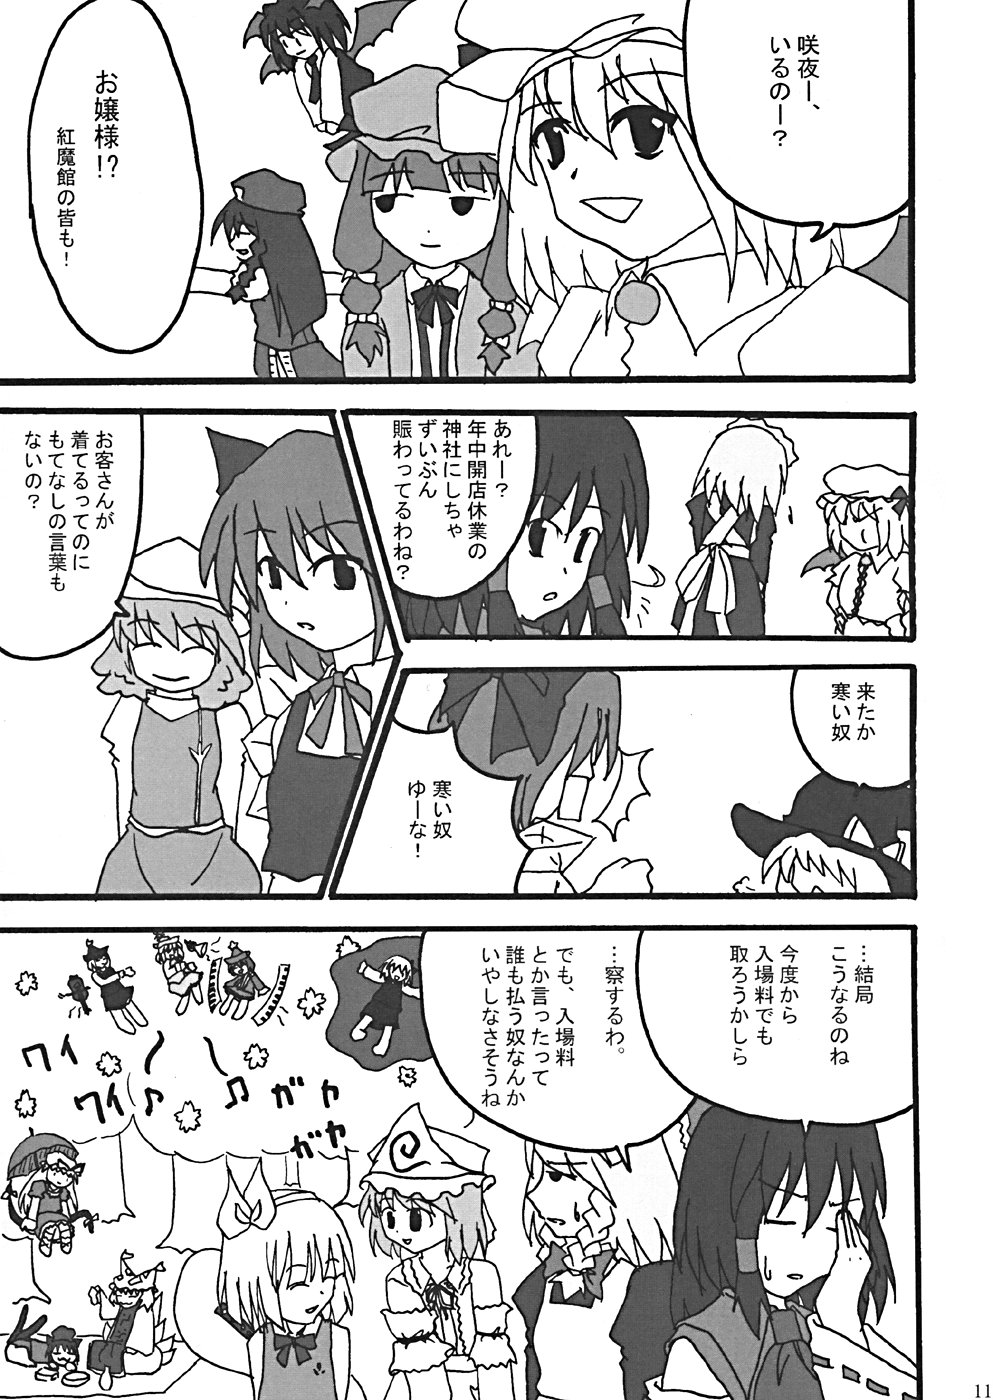 (CR35) [LemonMaiden (Various)] Oukasai ～ Cherry Point MAX (Touhou Project) page 14 full